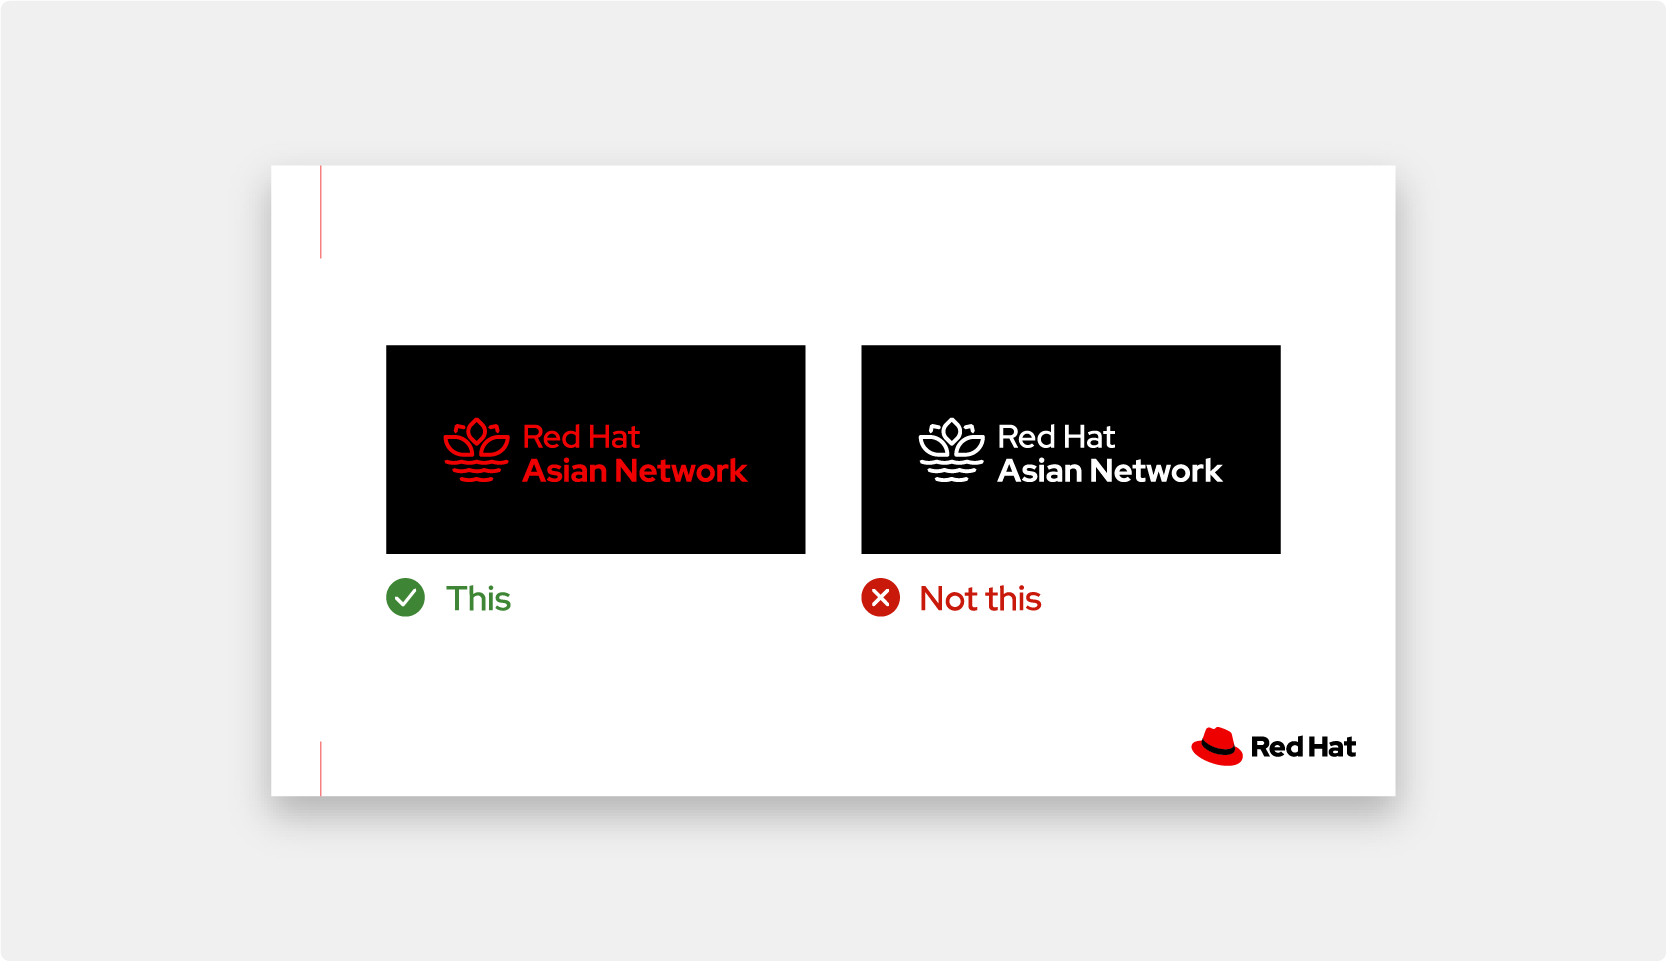 Example slide from the Red Hat Asian Network design guidelines showing that the logo cannot be used in one-color white for cultural reasons.